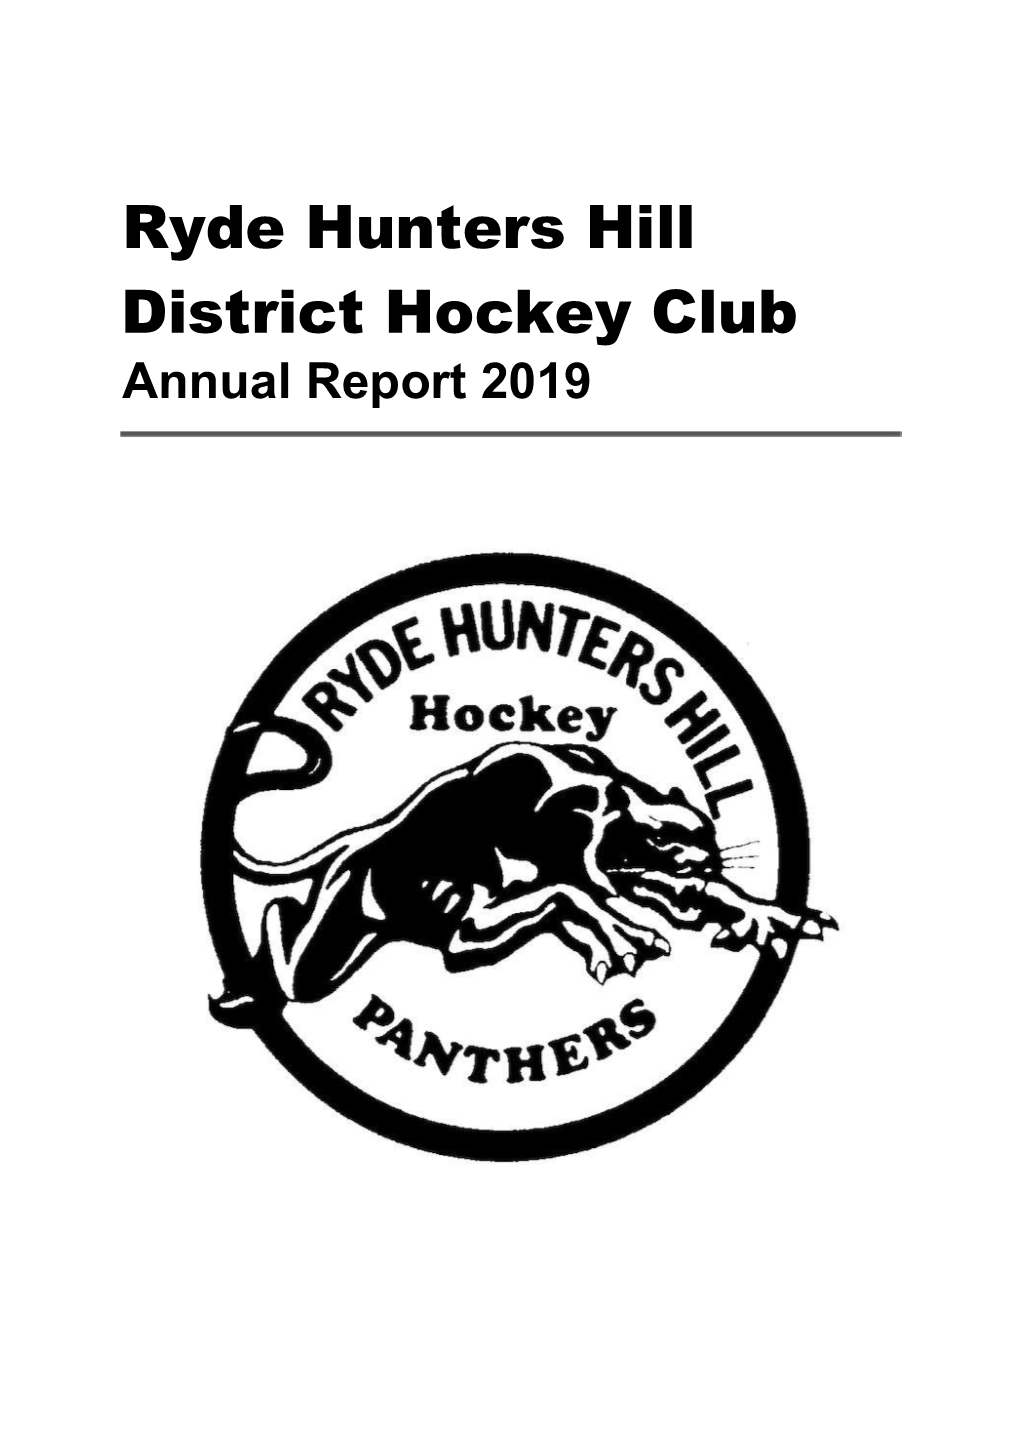 Ryde Hunters Hill District Hockey Club Annual Report 2019